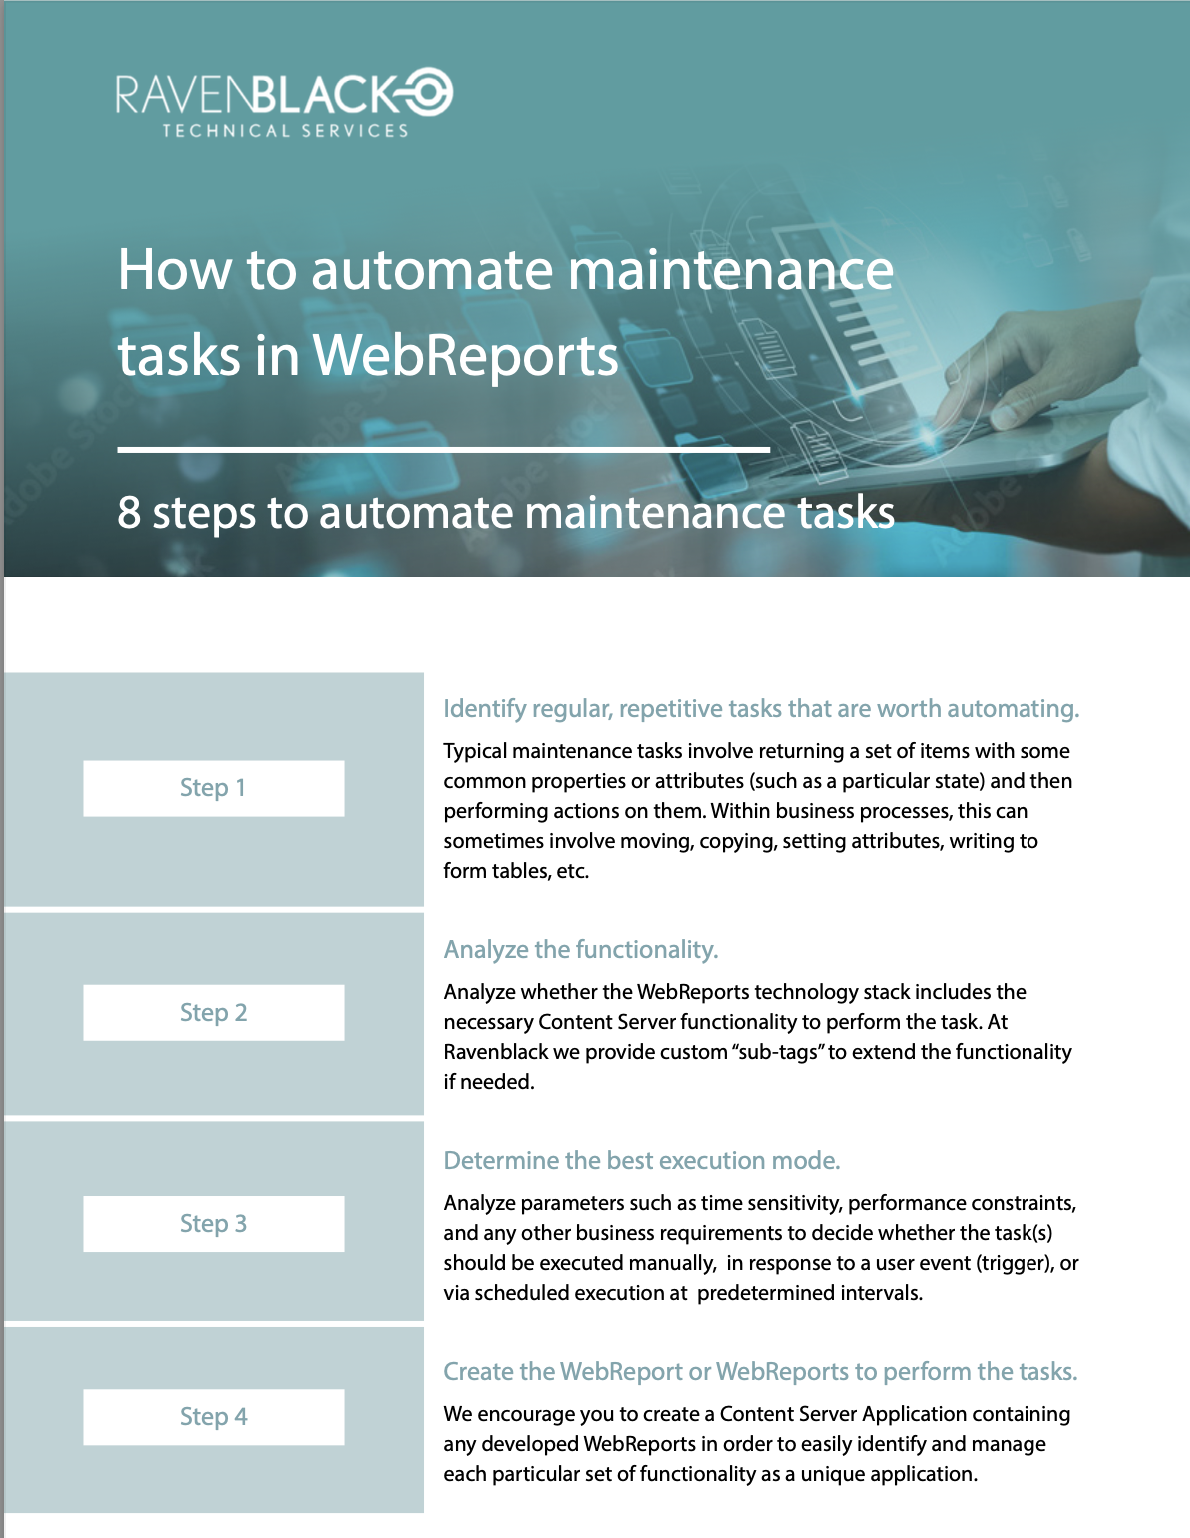 How to automate maintenance tasks in WebReports-1